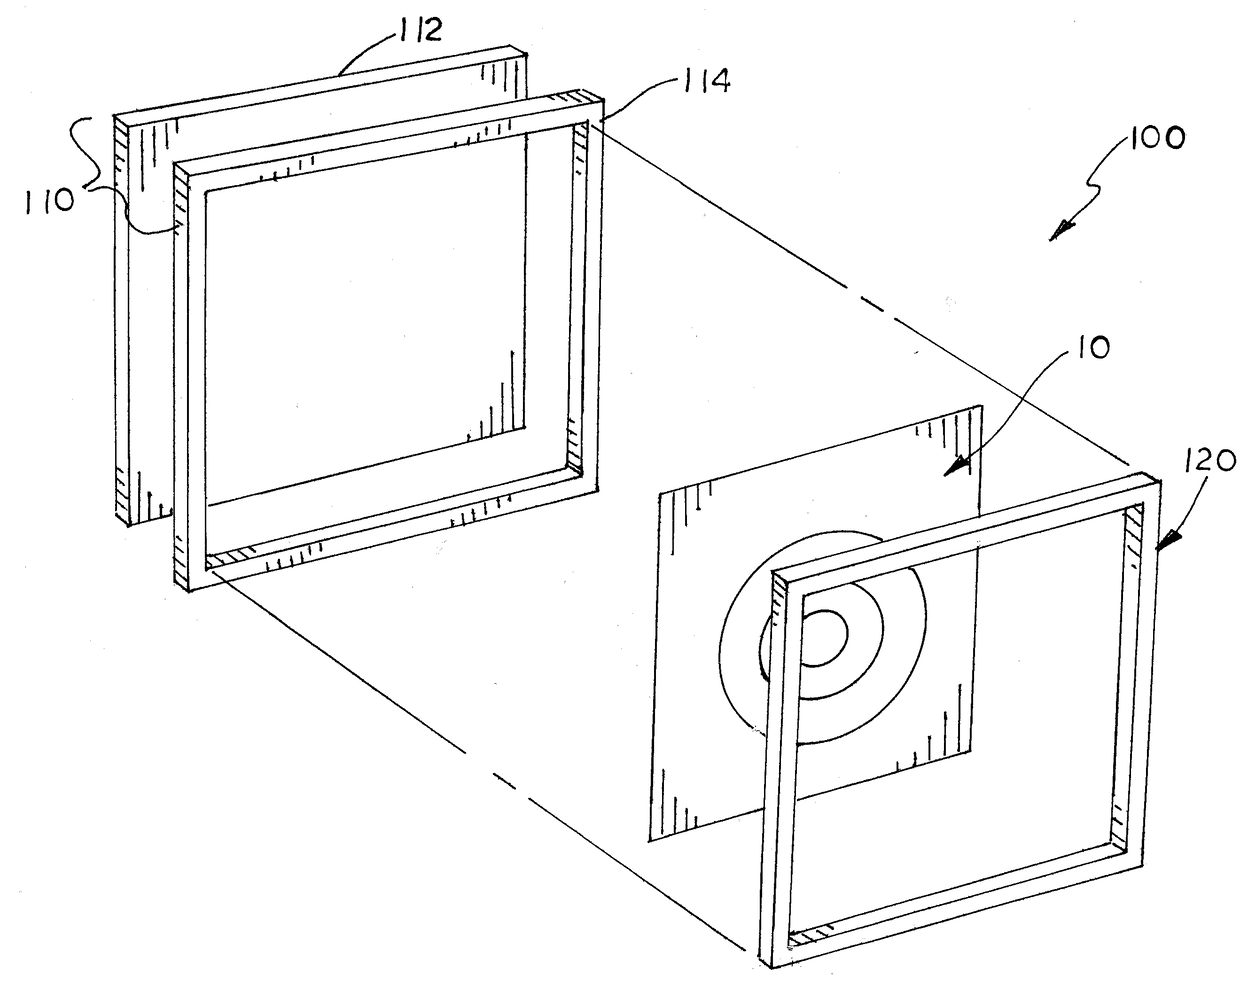 Ballistic picture frame for two dimensional targets